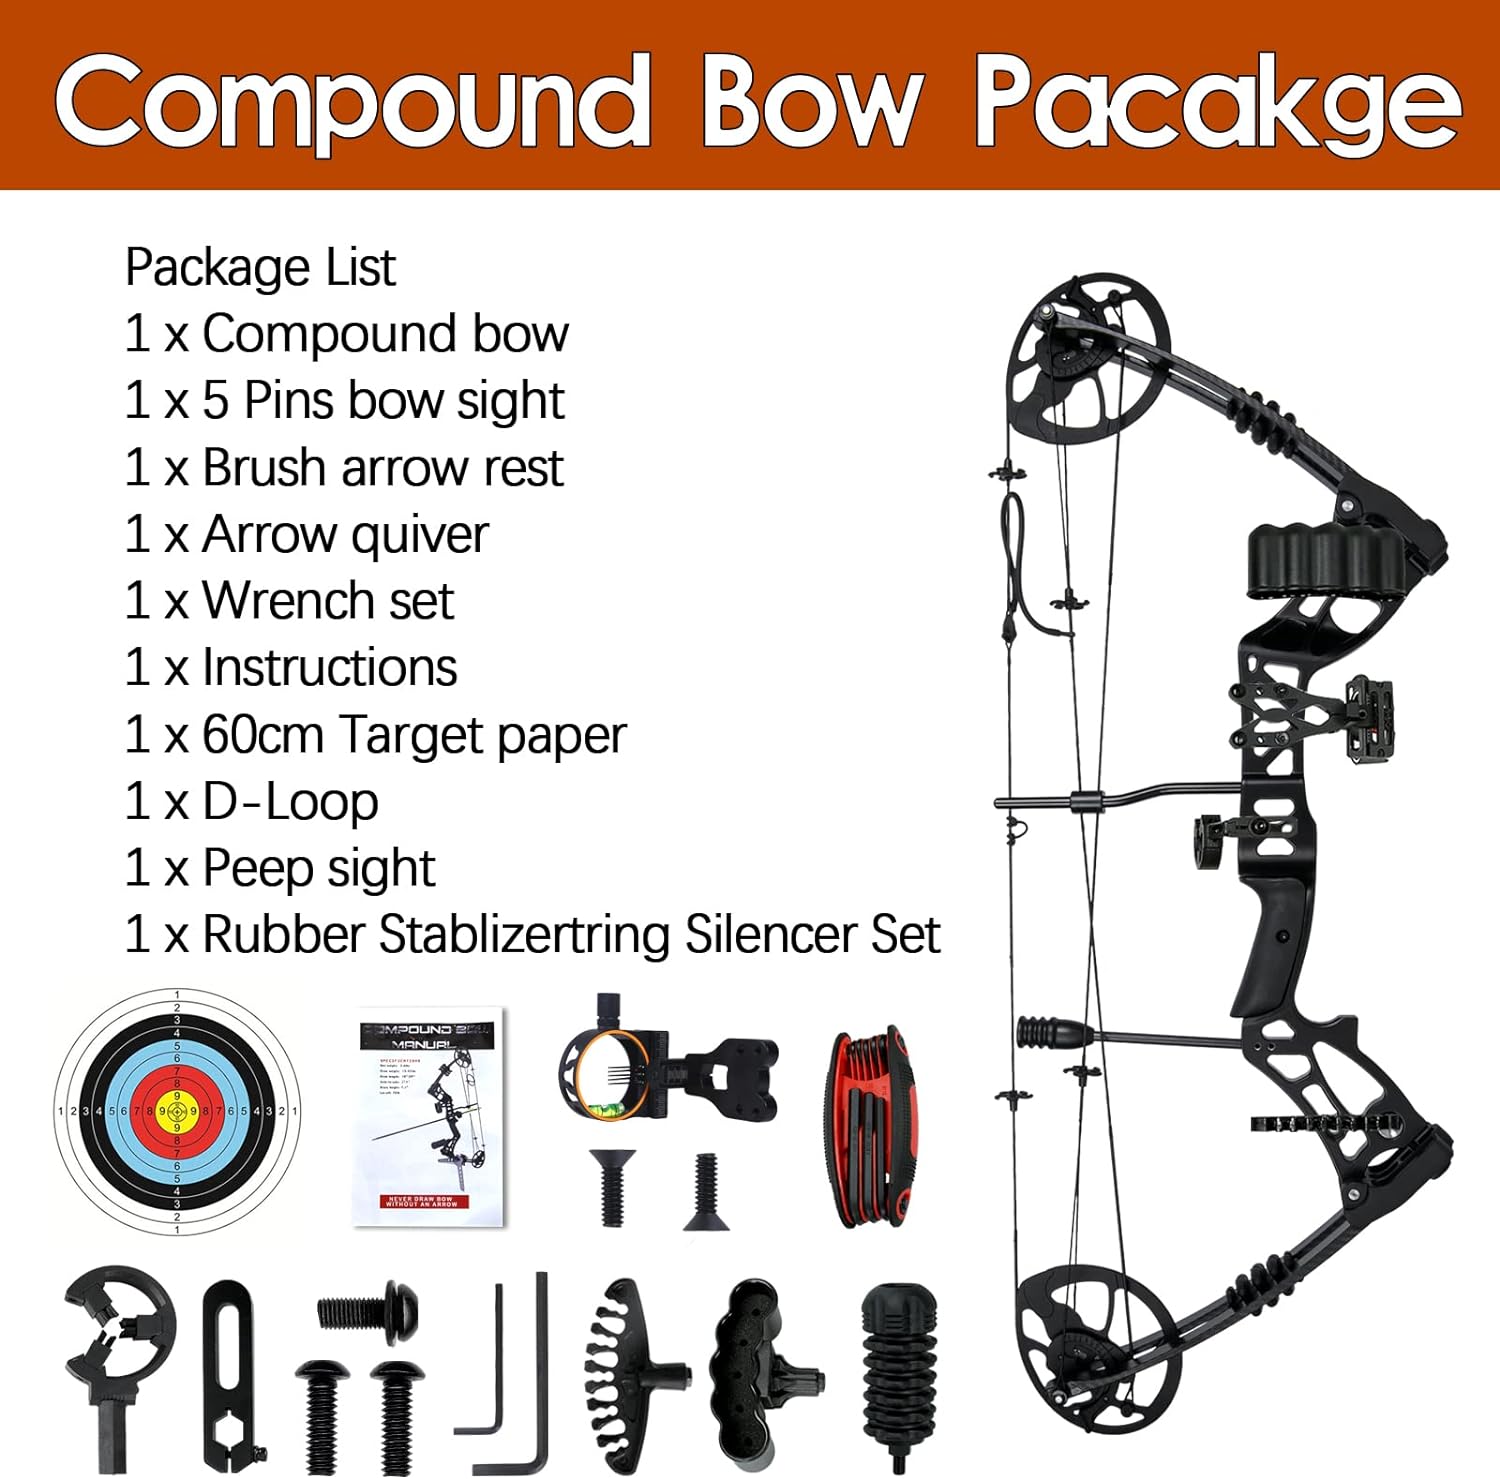 AKCHOER Compound Bow and Arrow Set, 30-70 Lbs Draw Weight, 23.5"-31" Draw Length, Right Handed Bow for Adult, 320 Fps Hunting & Target Bow with Accessories